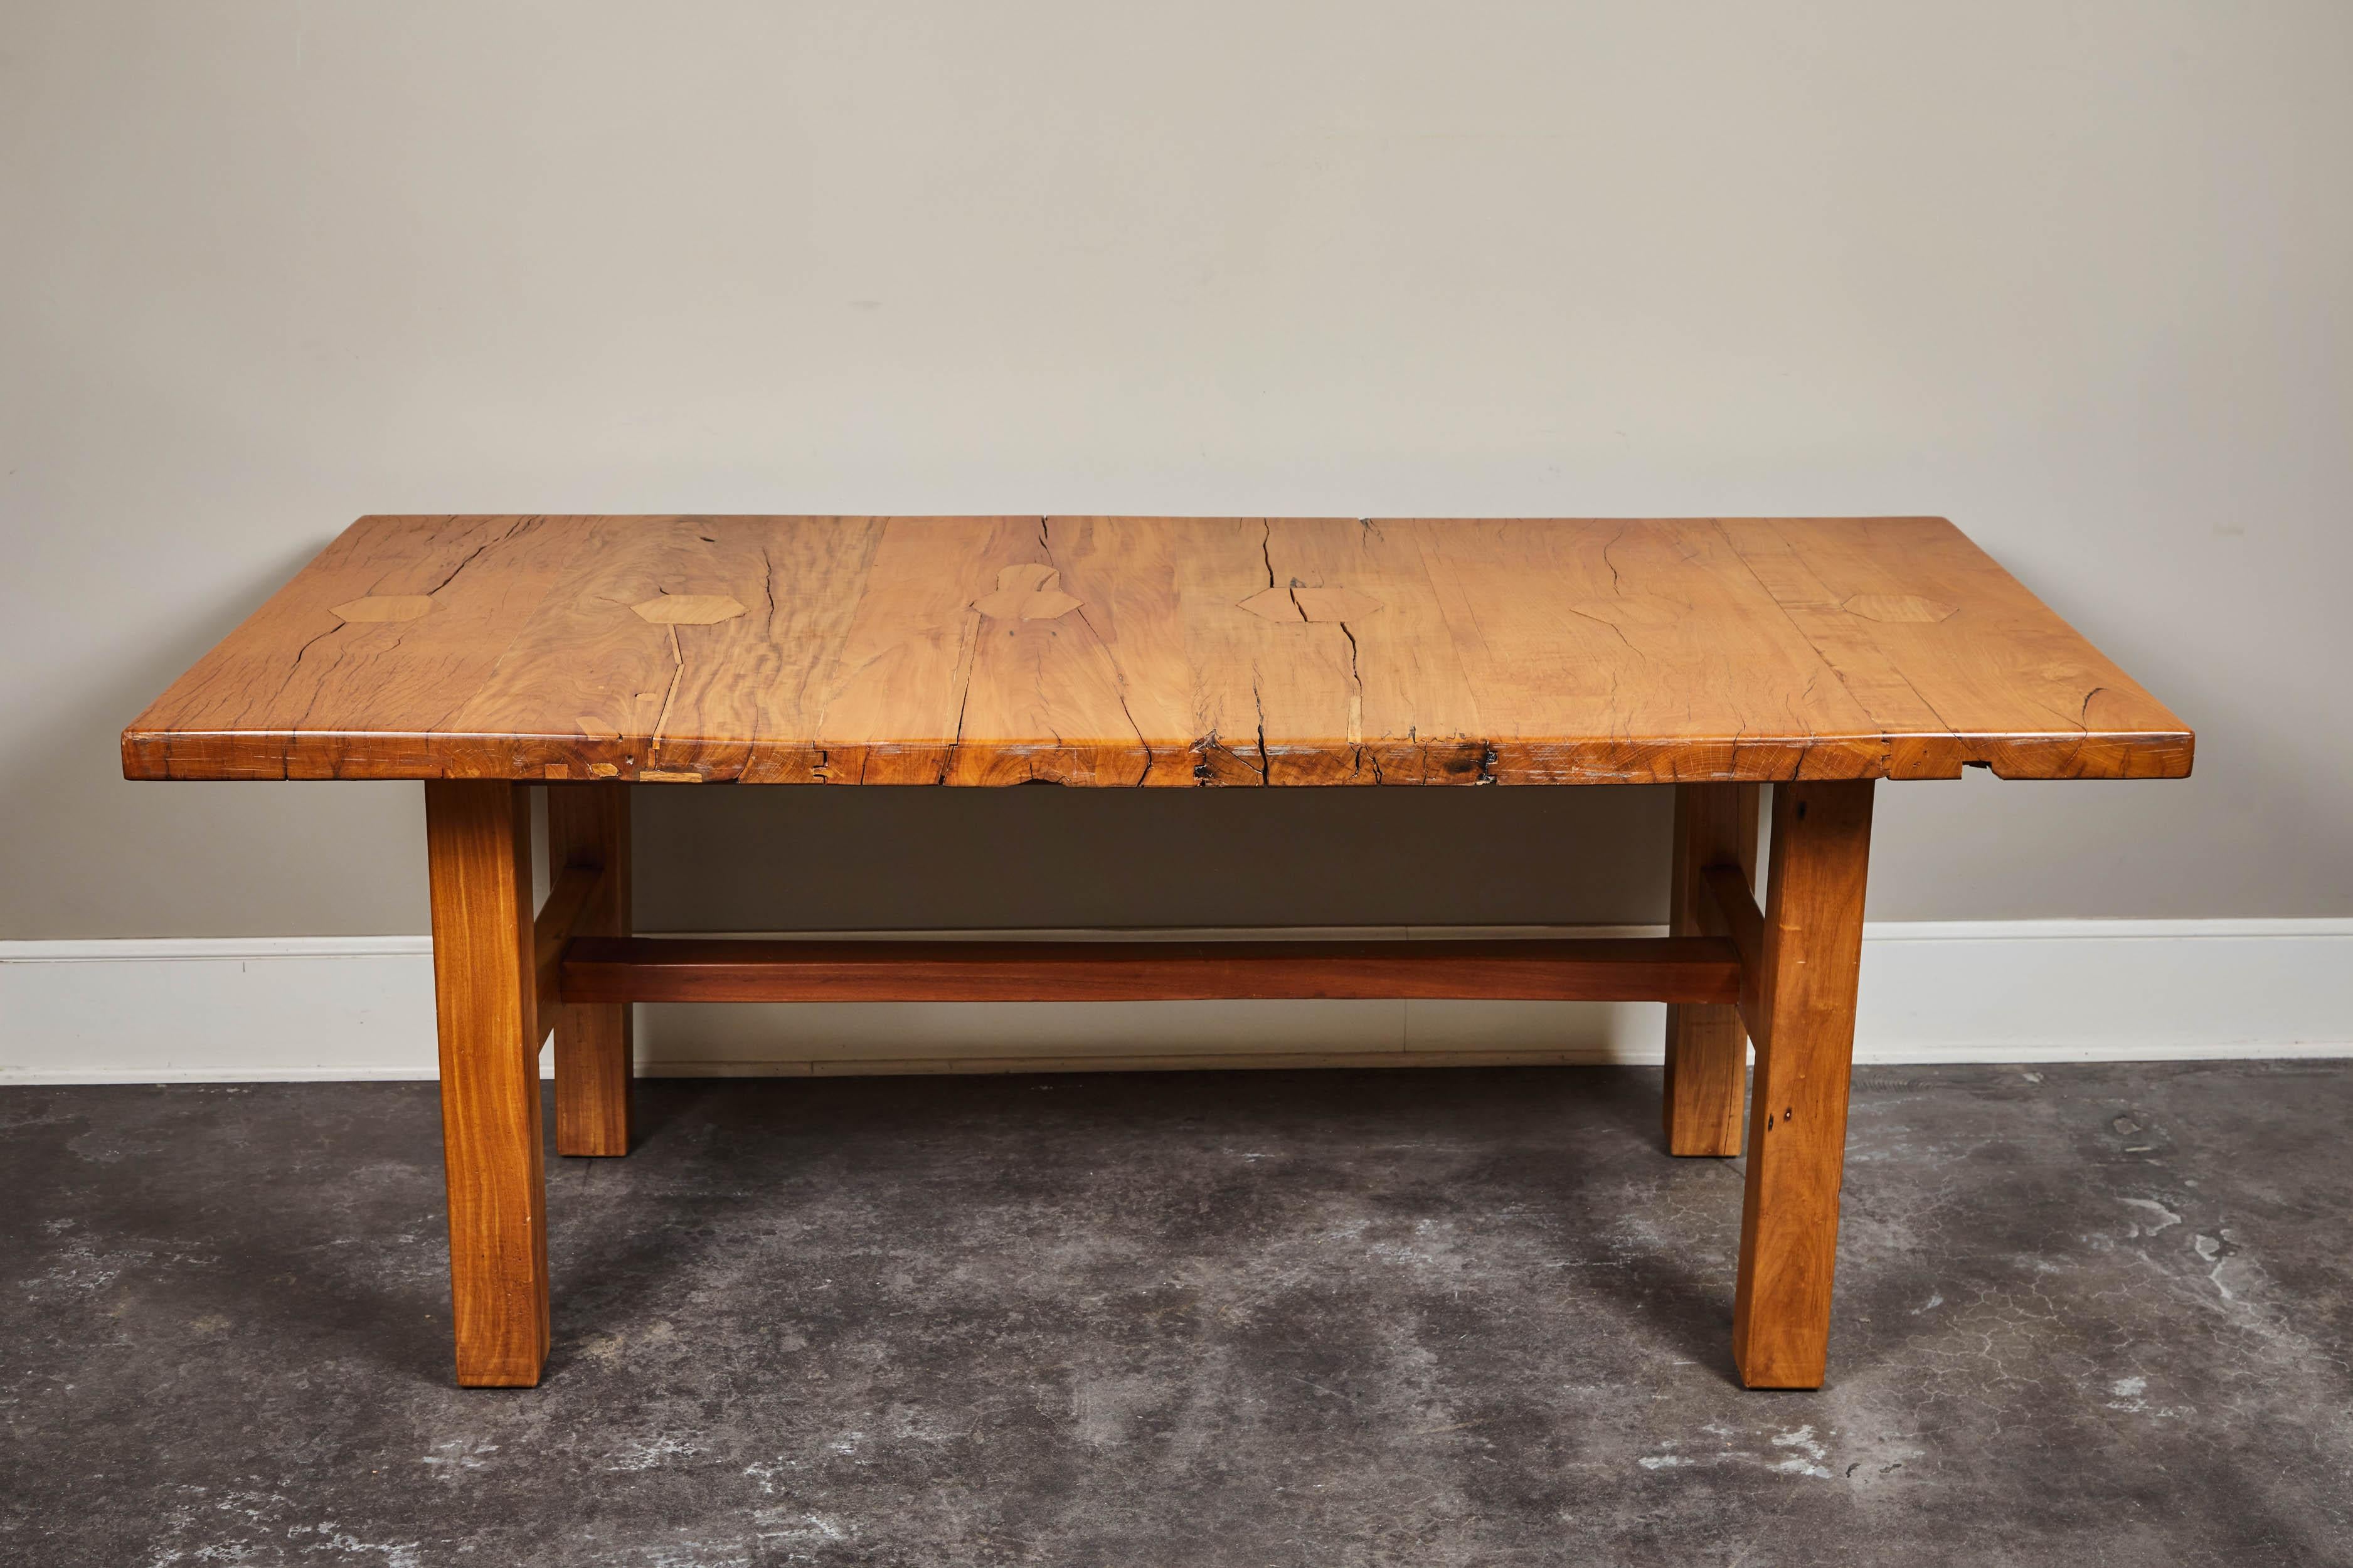 Indonesian Rare 19th Century Solid Molave Wood Table For Sale